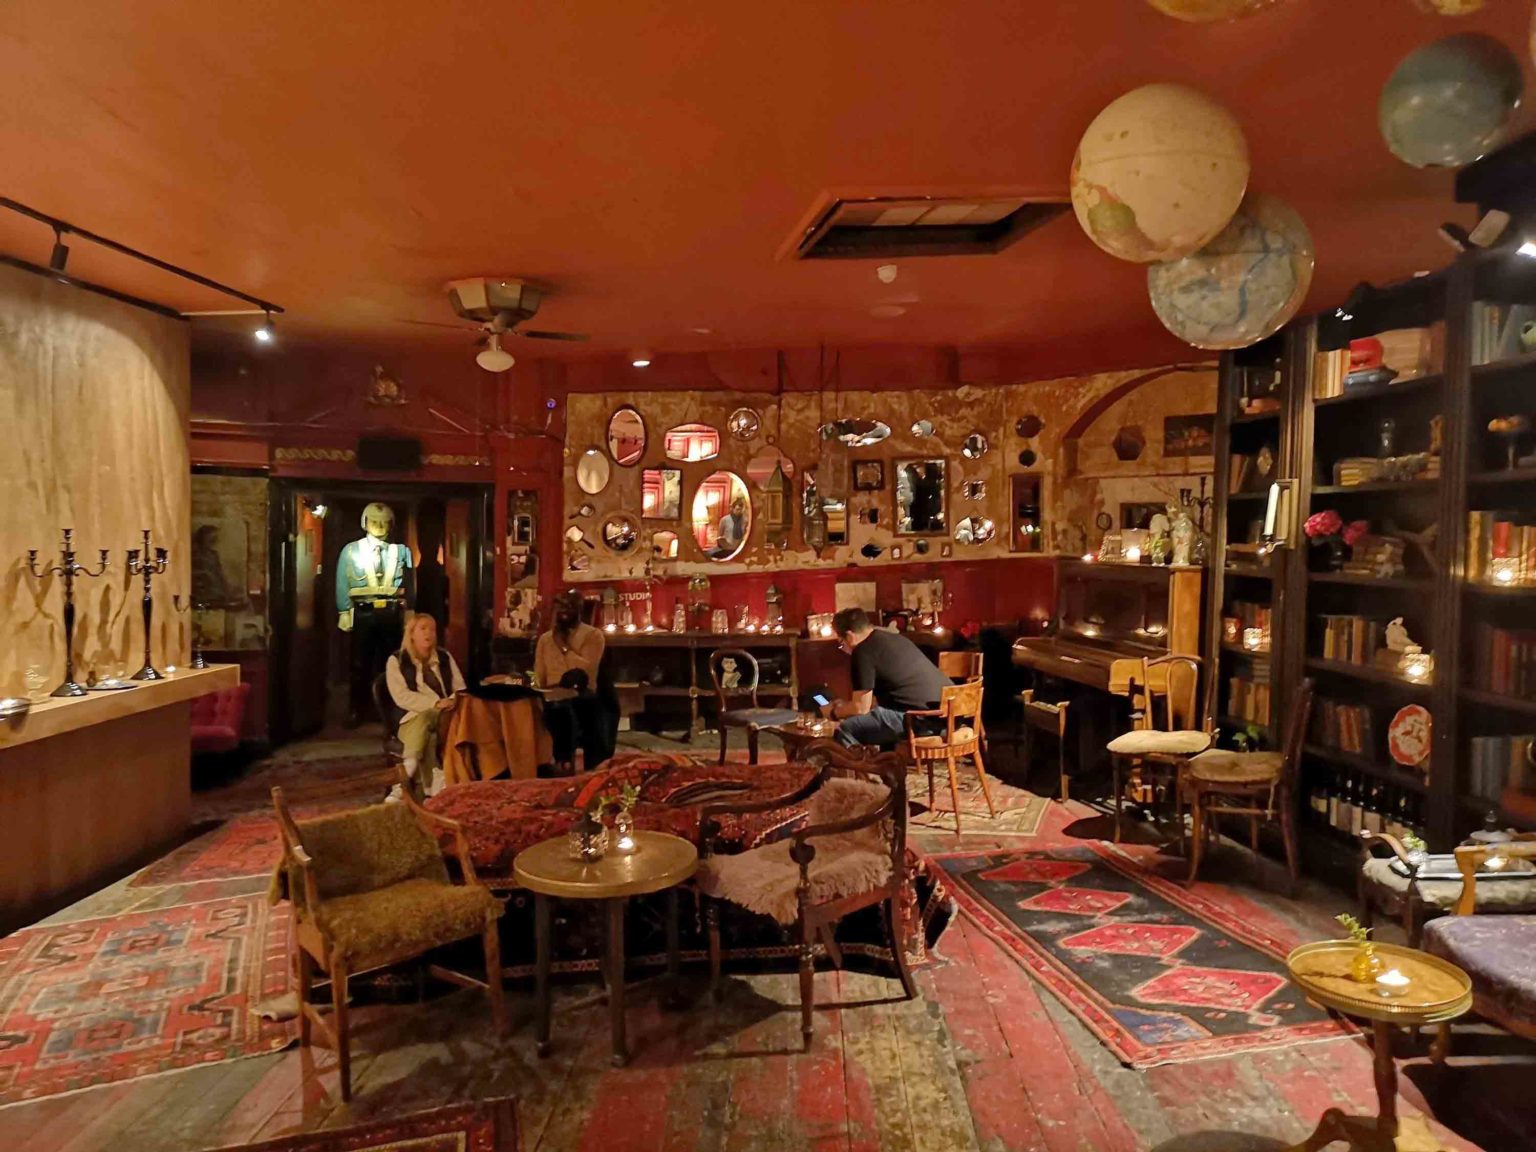 The interior of the 'the most atmospheric bar in the known universe'